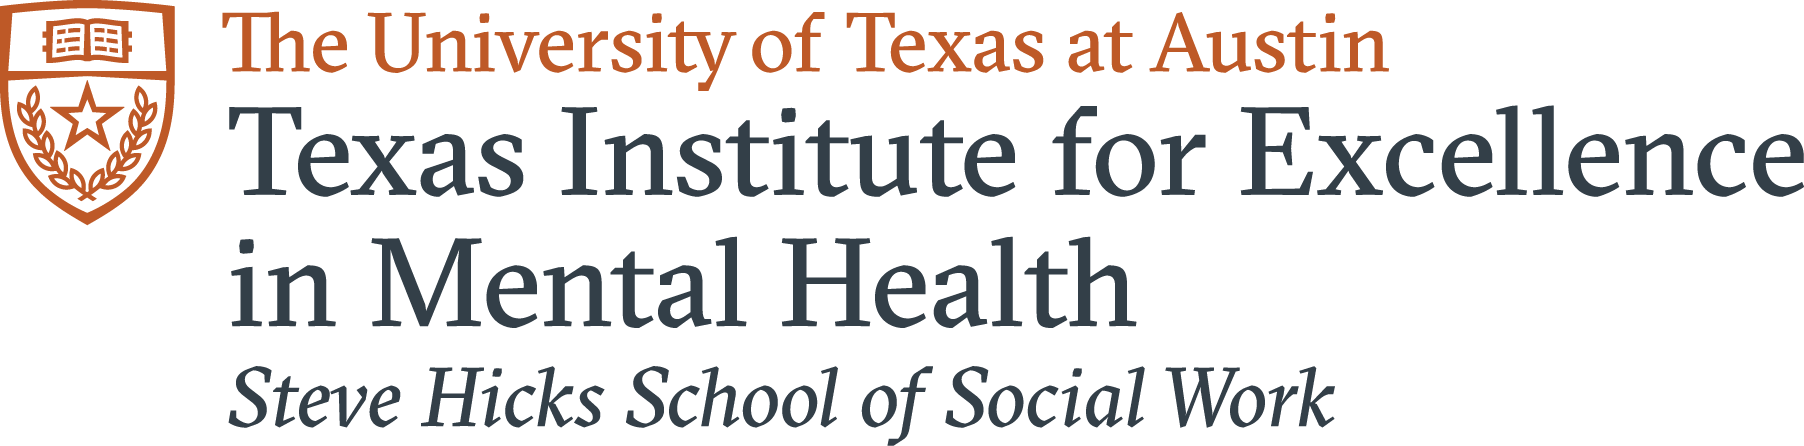 The Texas Institute for Excellence in Mental Health logo is written in text to the right of The University of Texas at Austin orange wordmark, a shield extracted from the university seal, with an open book and 18 leaves across two branches to represent 18 colleges and schools. Underneath “The University of Texas at Austin” written out in orange text to the right of the shield, lives the name “Texas Institute for Excellence in Mental Health.” “Steve Hicks School of Social Work” is written out in italicized text below the organization’s name to identify the college the organization operates within.